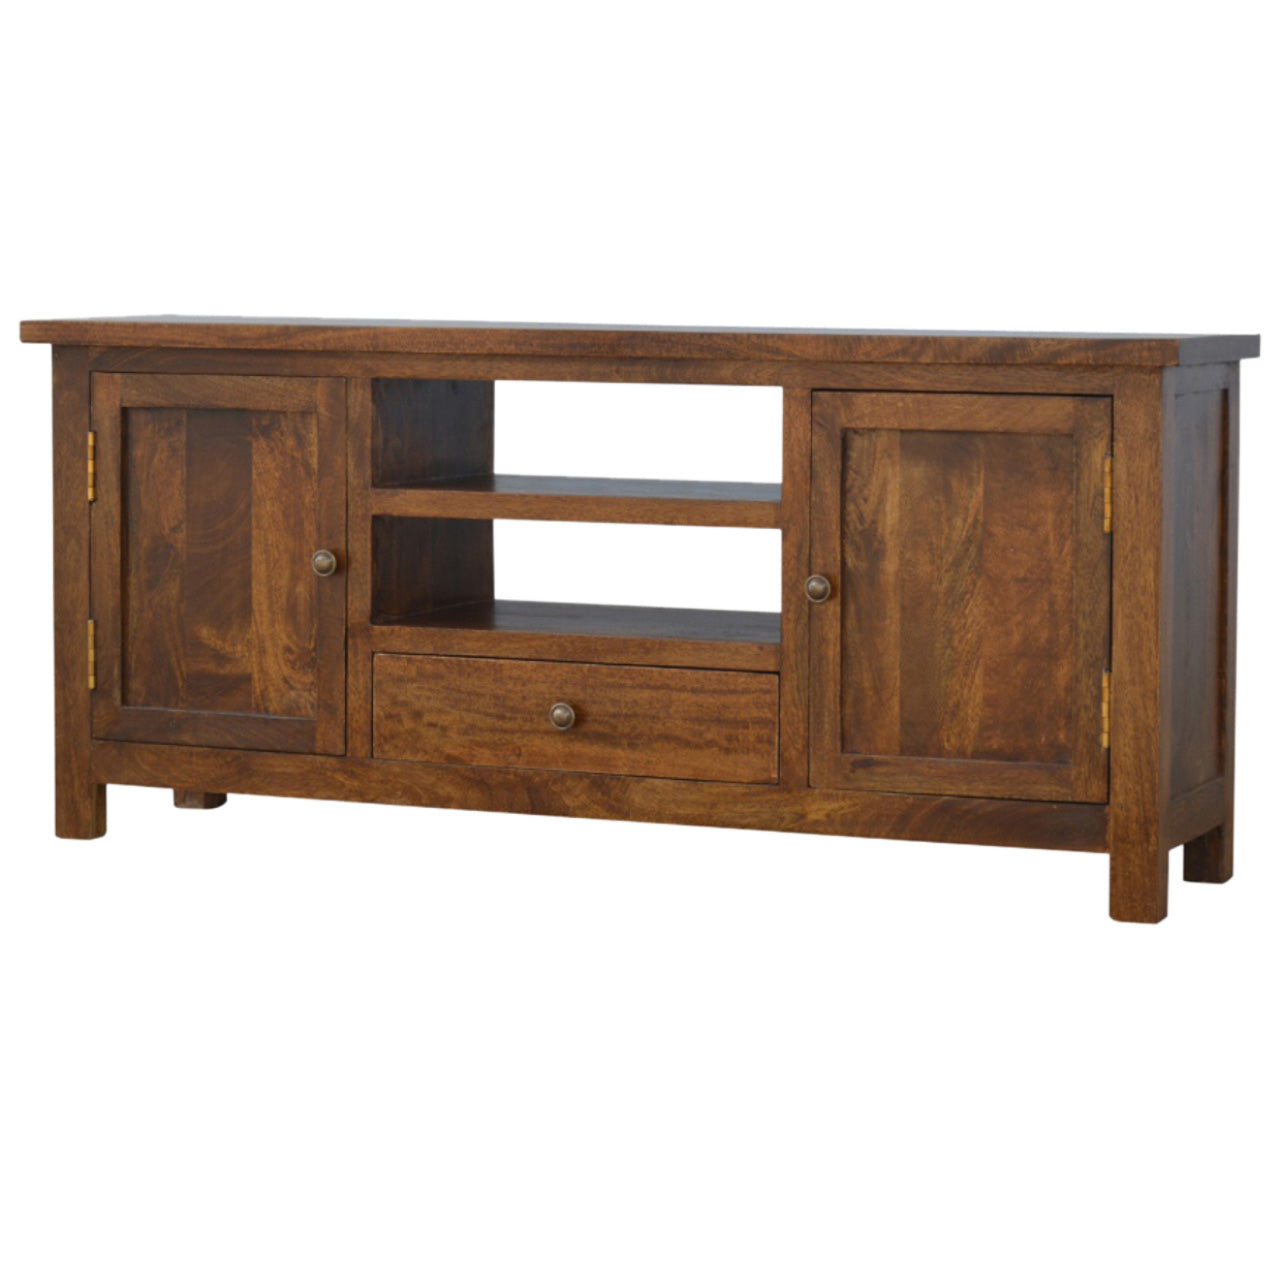 View Solid Wood Media Unit information